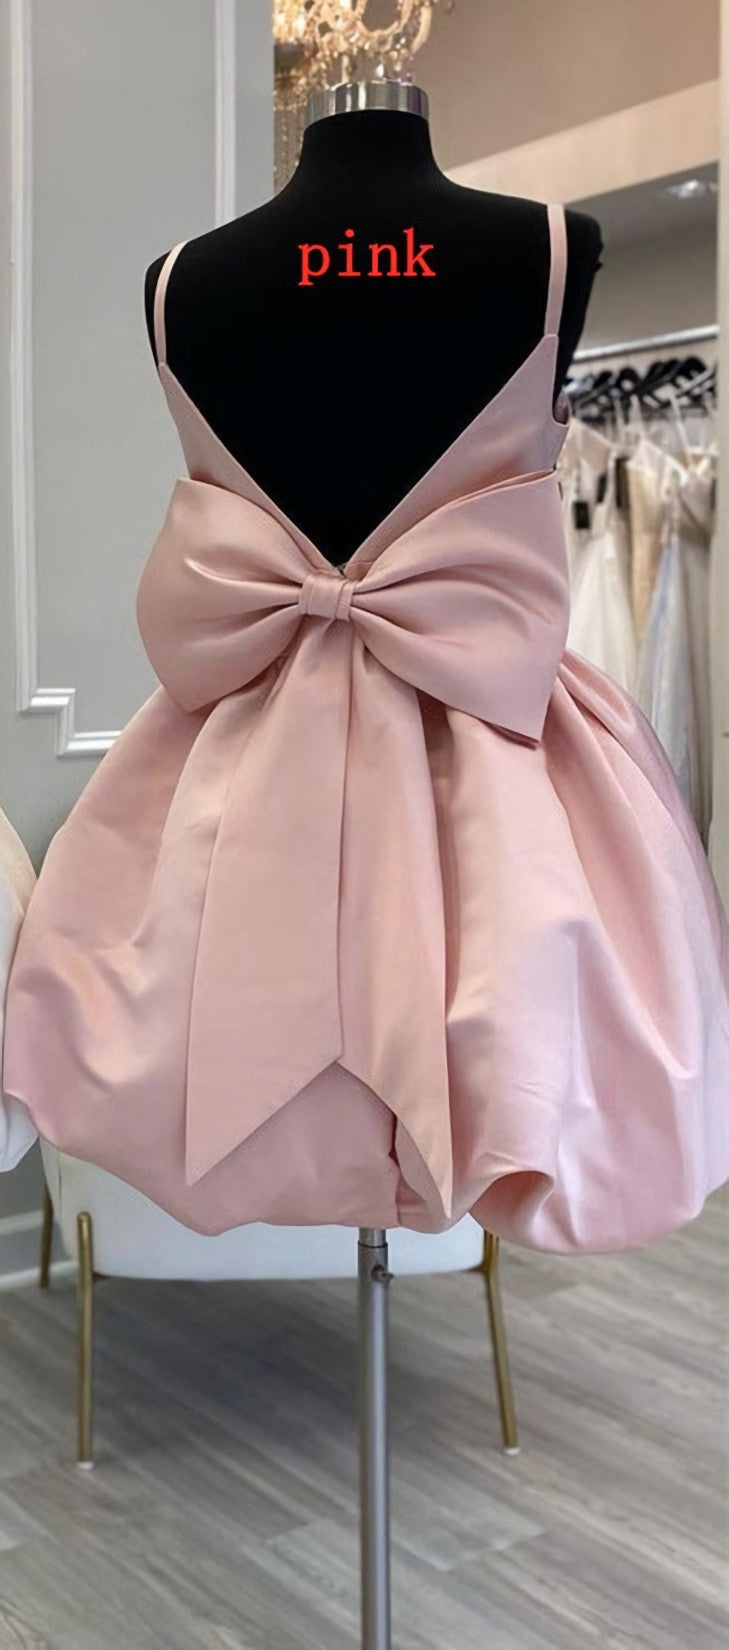 Hoco Dress, Cute V-Neck Short Party Cocktail Dress with Bow